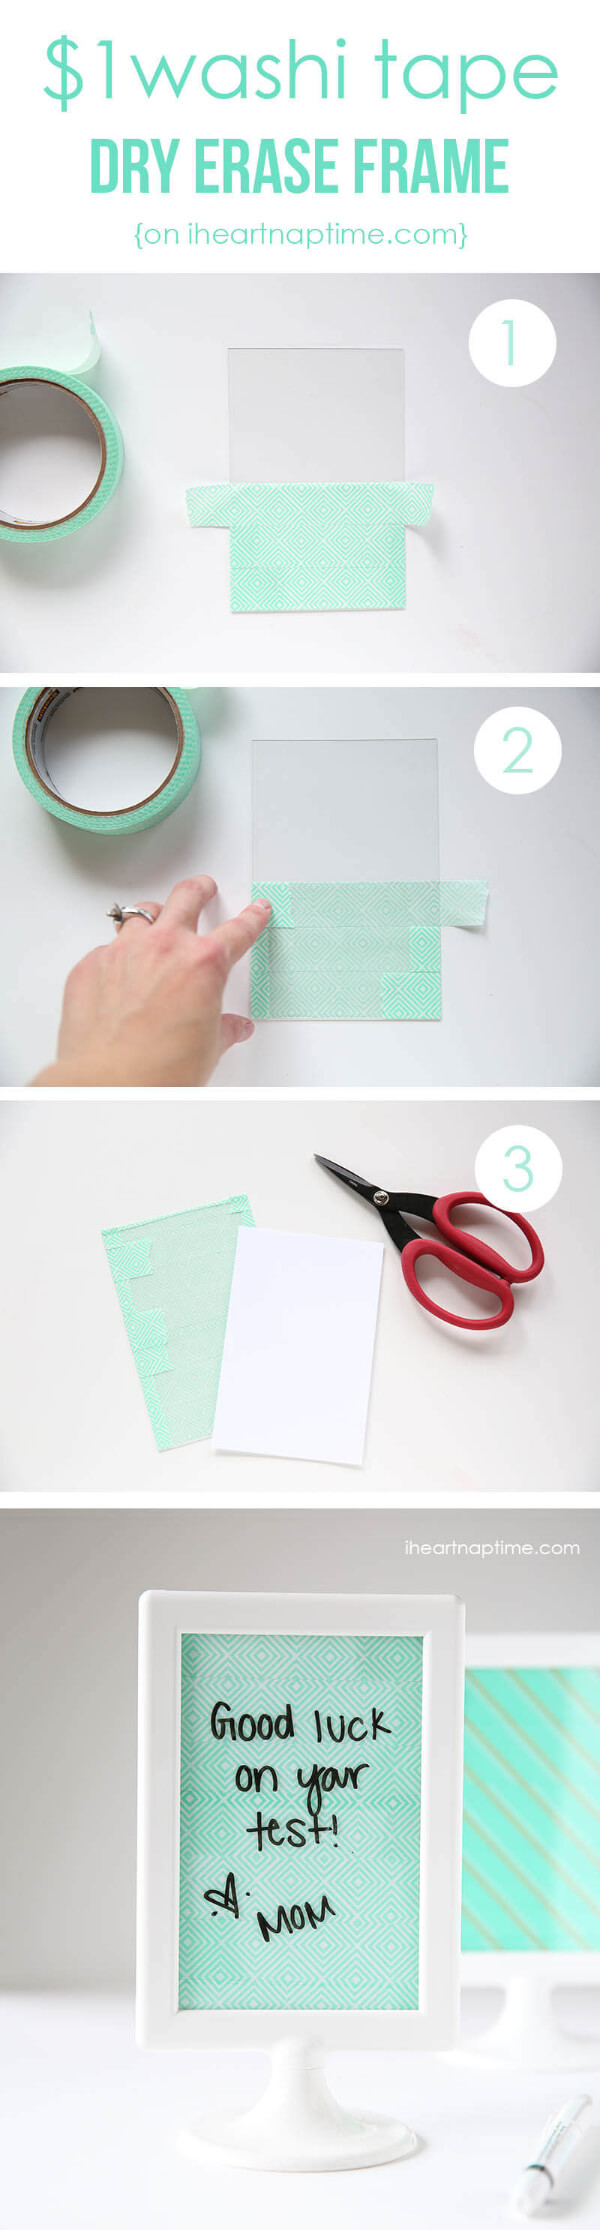 Washi Paper Tape Dry Erase Frame Crafts Idea Step By Step